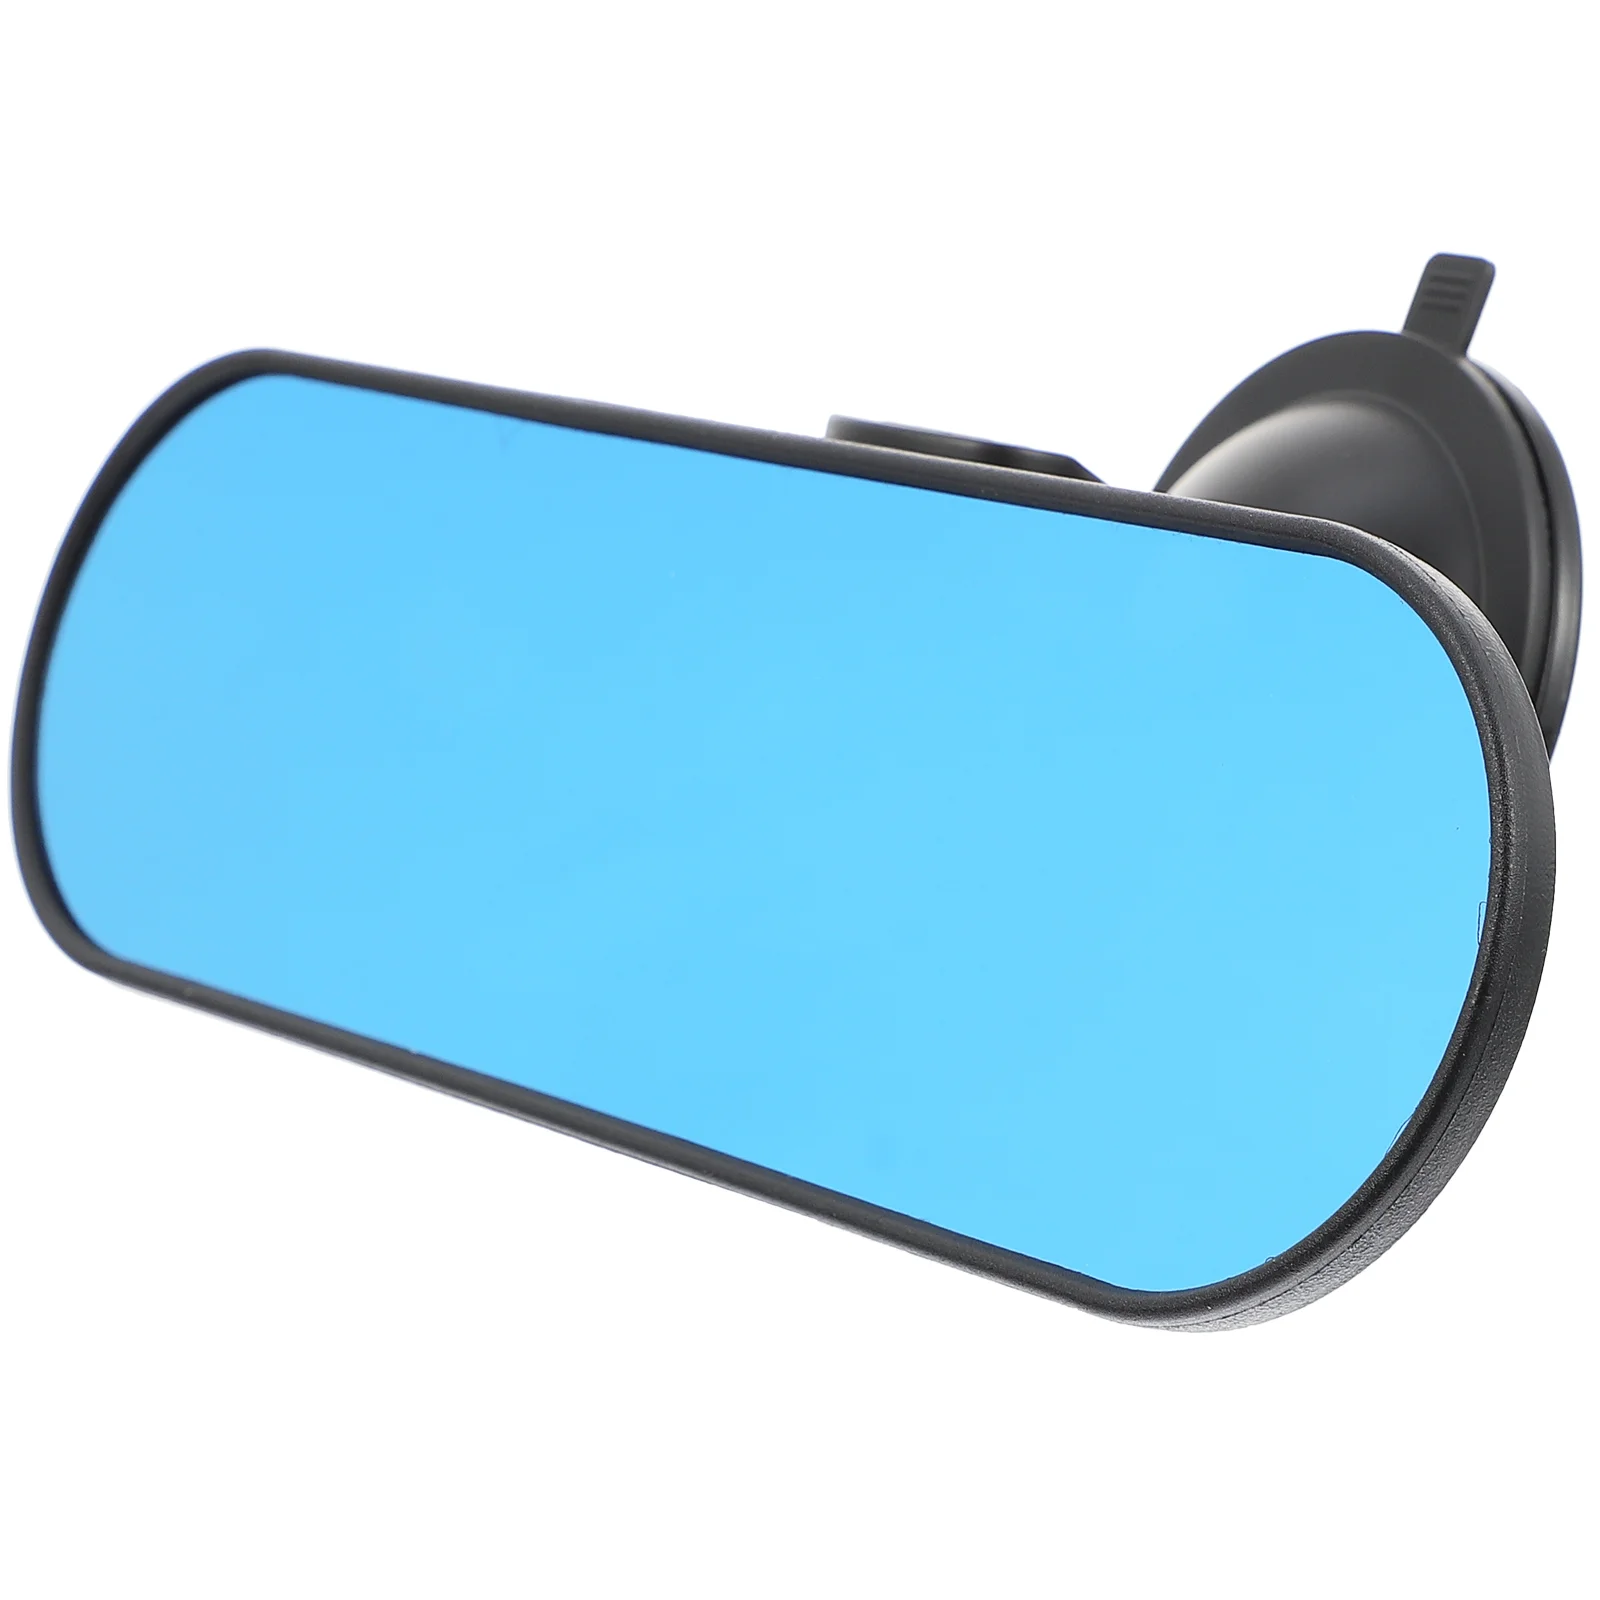 

Auto Rearview Mirror Cars Cars Backseat Baby Mirror Suction Cup Rear View Mirror Suction Cup Mirror Detachable Backseat Mirror